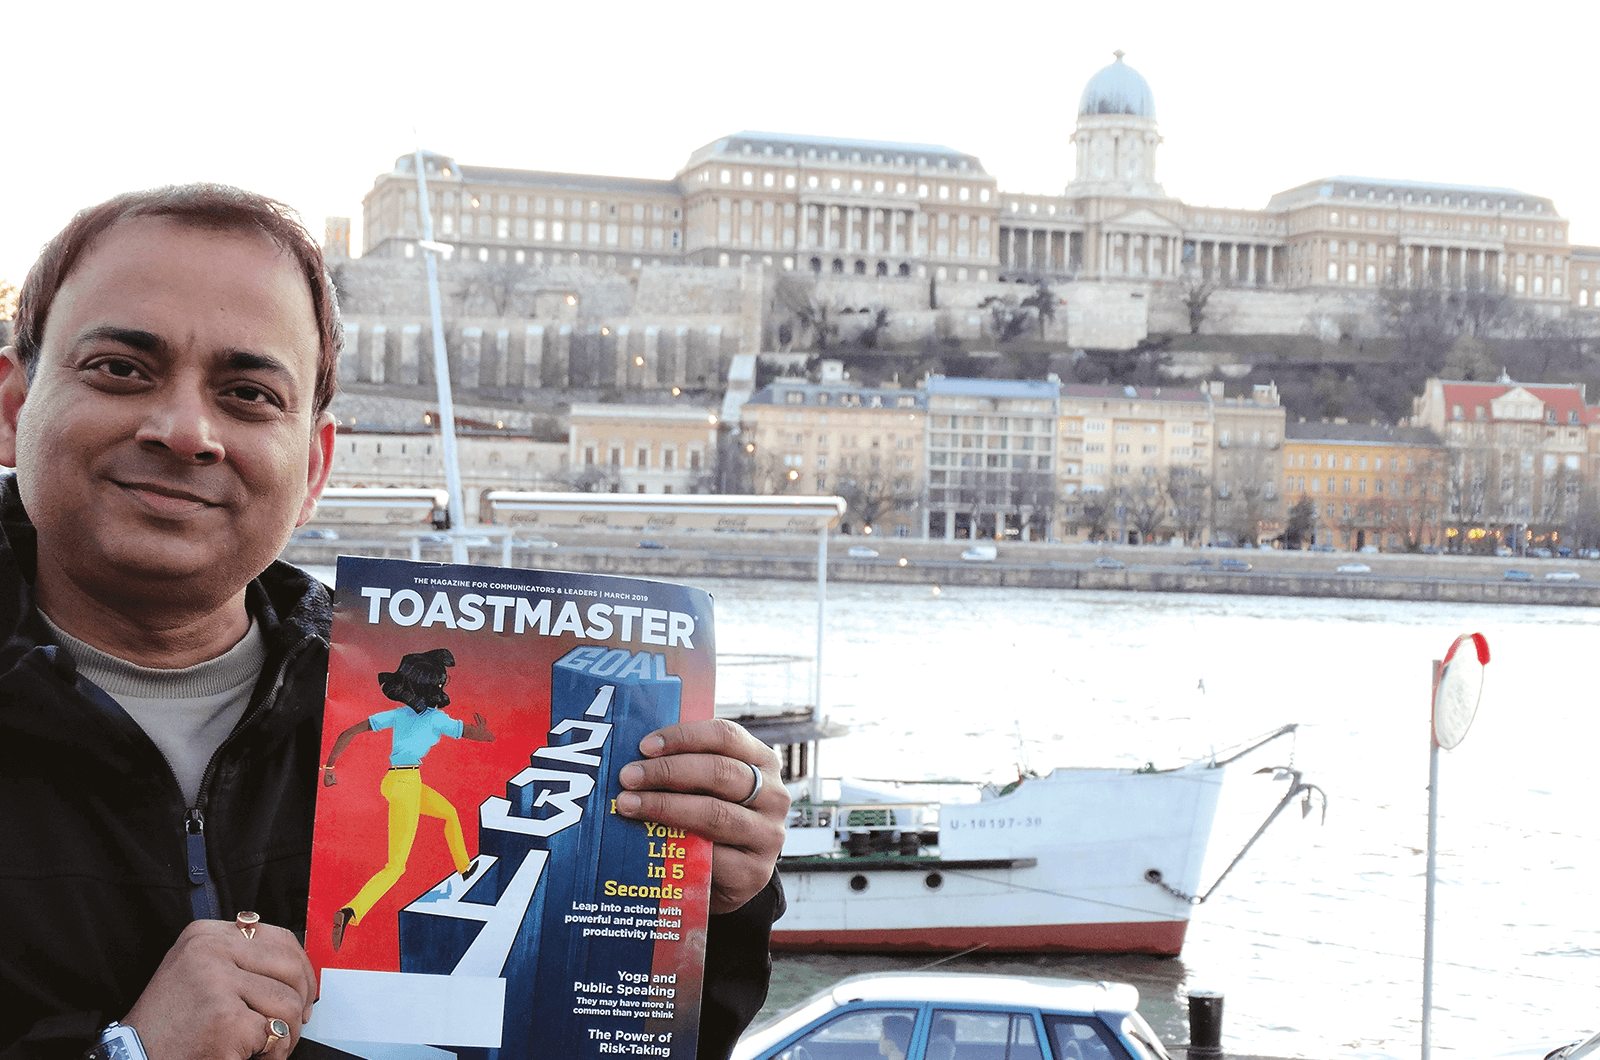 Arvind Achal of Birselden, Switzerland, enjoys sightseeing on the Danube River in Budapest, Hungary, in front of the Buda Castle.